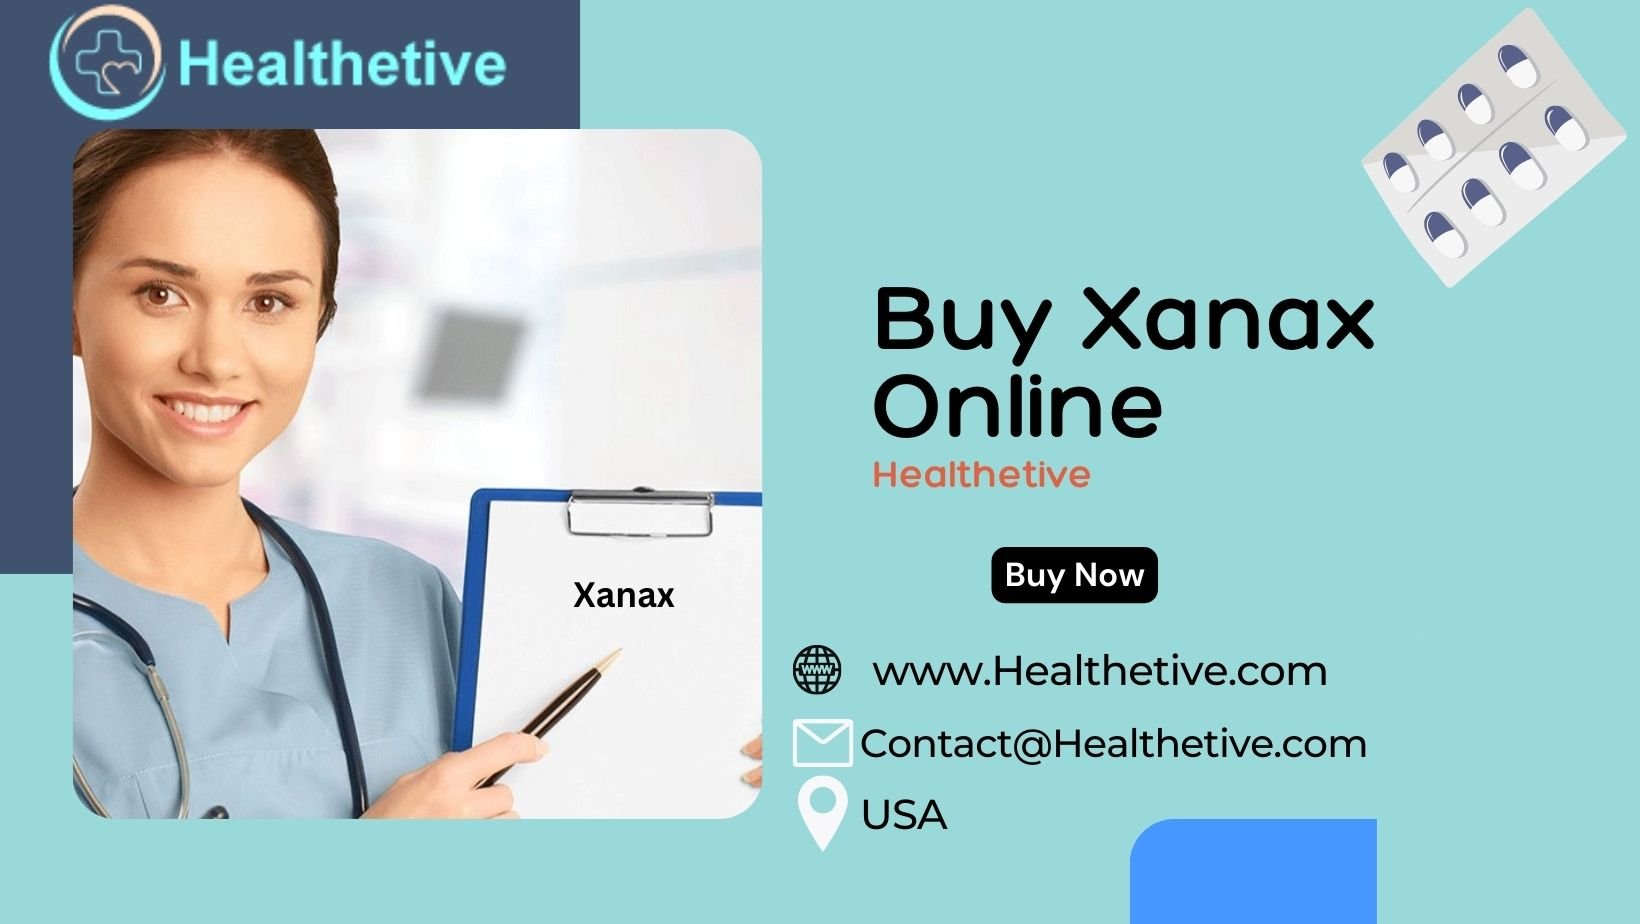 Buy Xanax Online without a prescription - Order Xanax Online - Buy Xanax doses Online cover